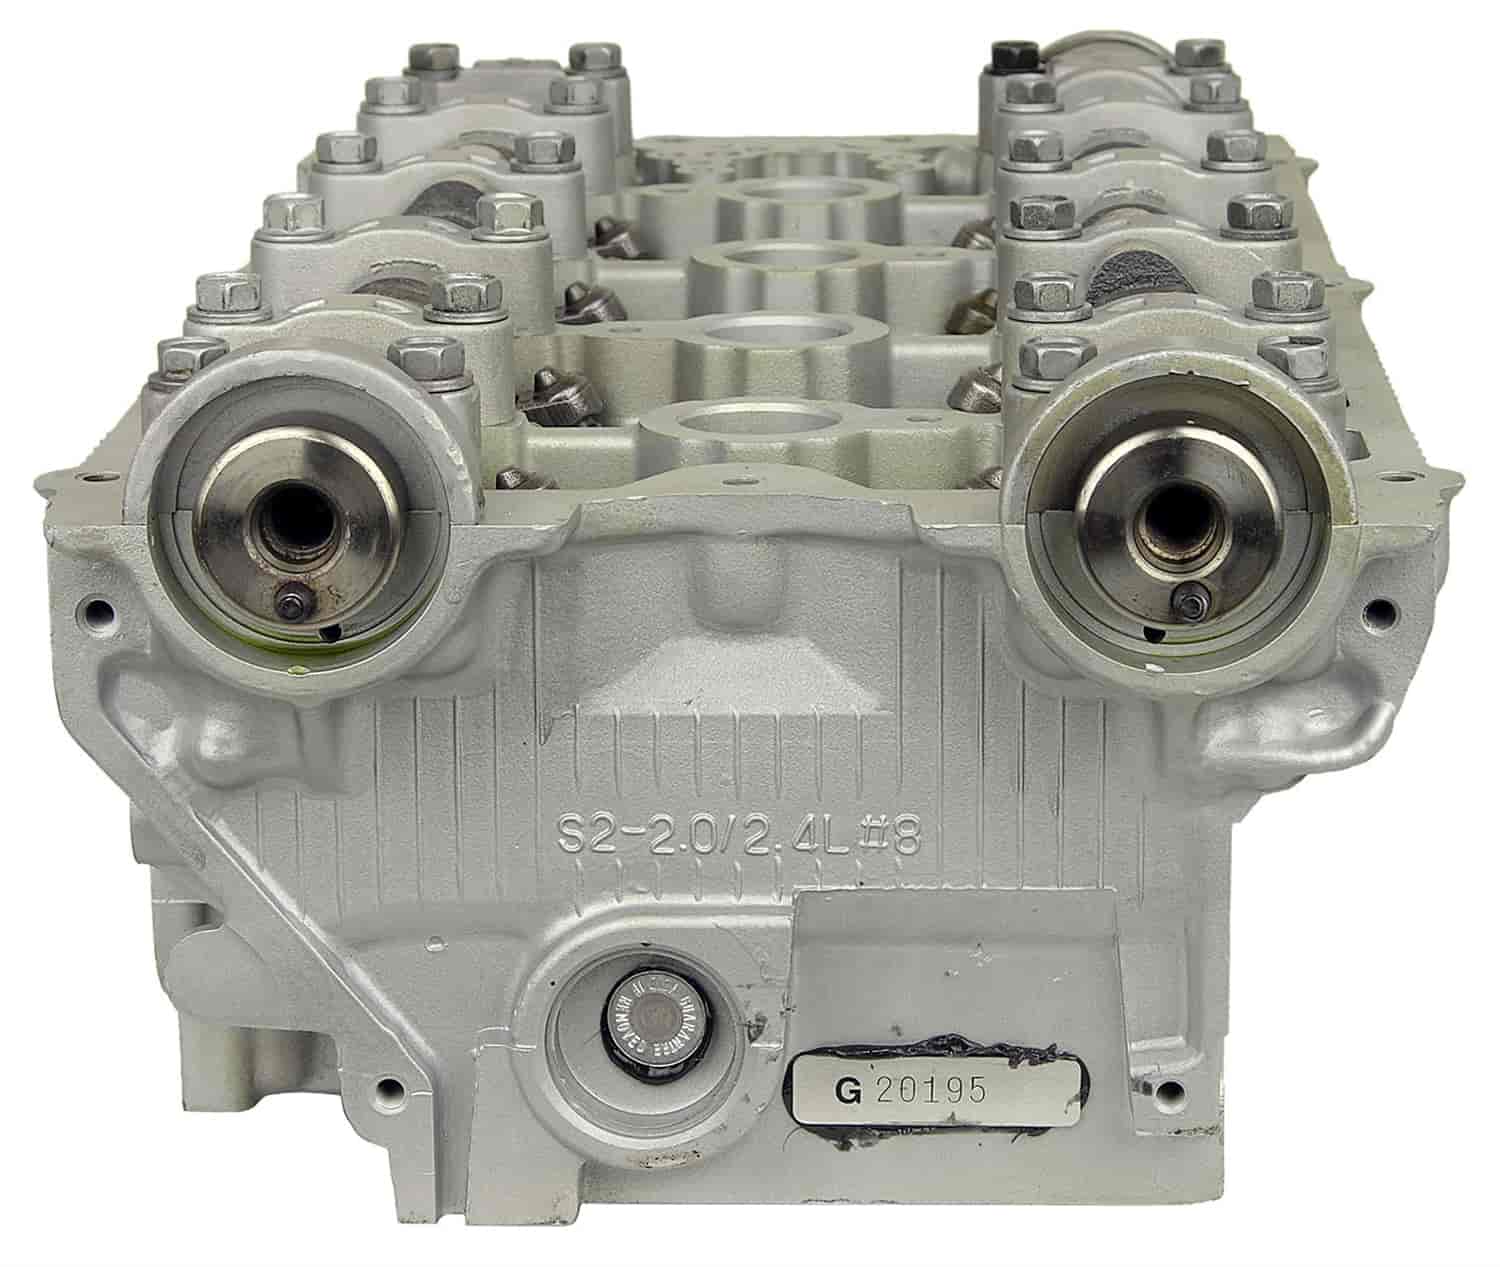 Remanufactured Cylinder Head for 1999-2006 Hyundai/Kia with 2.4L L4